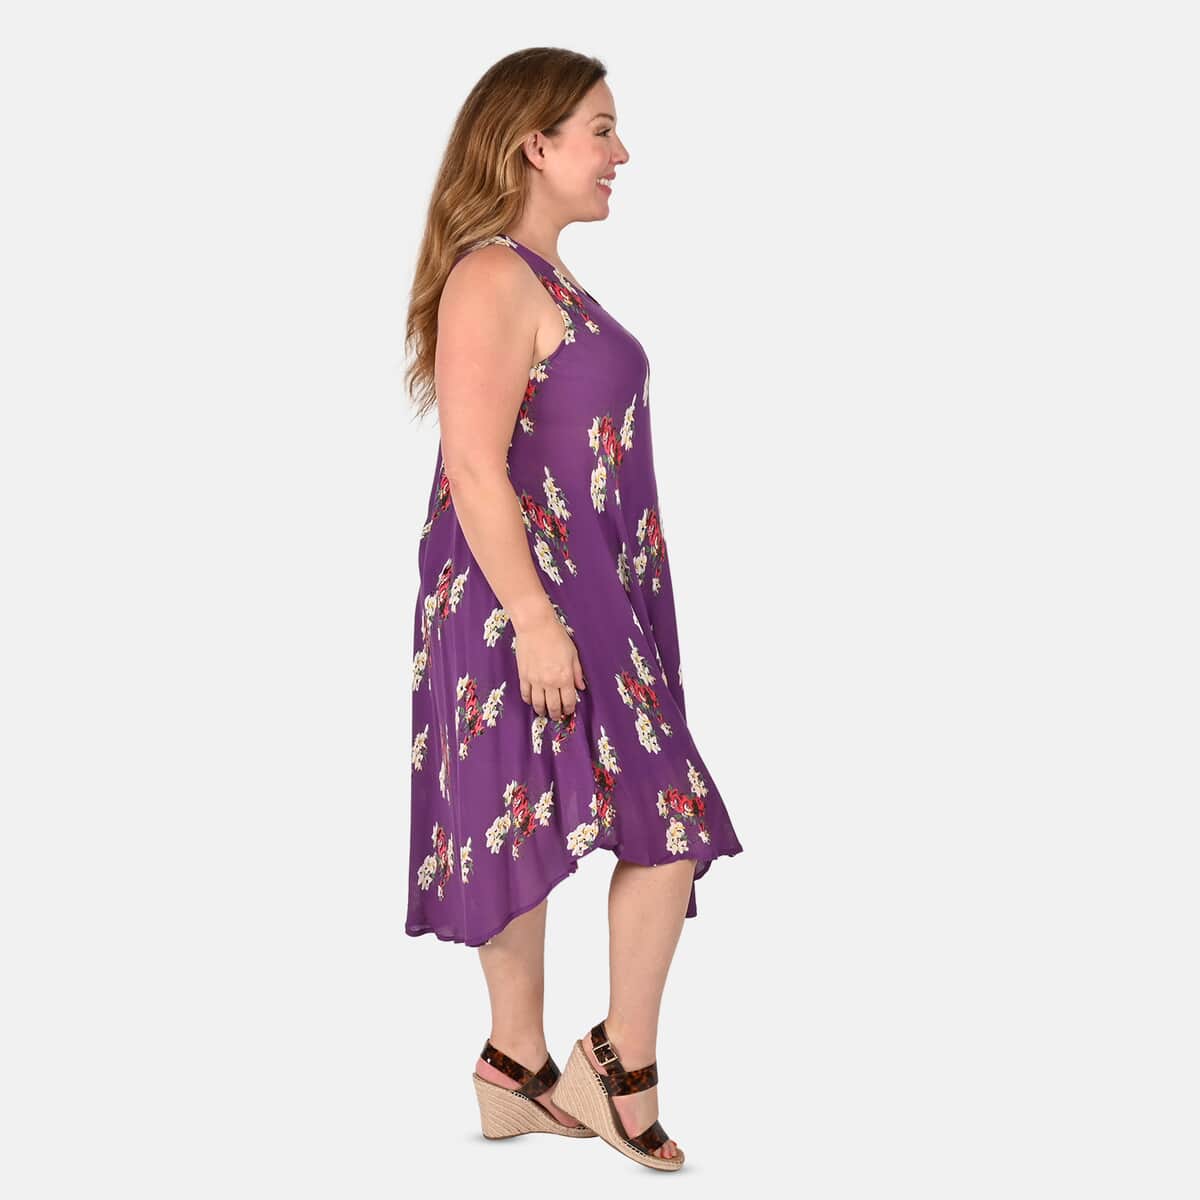 Tamsy Purple Women's Repeat Floral Print Umbrella Dress -One Size Missy image number 2